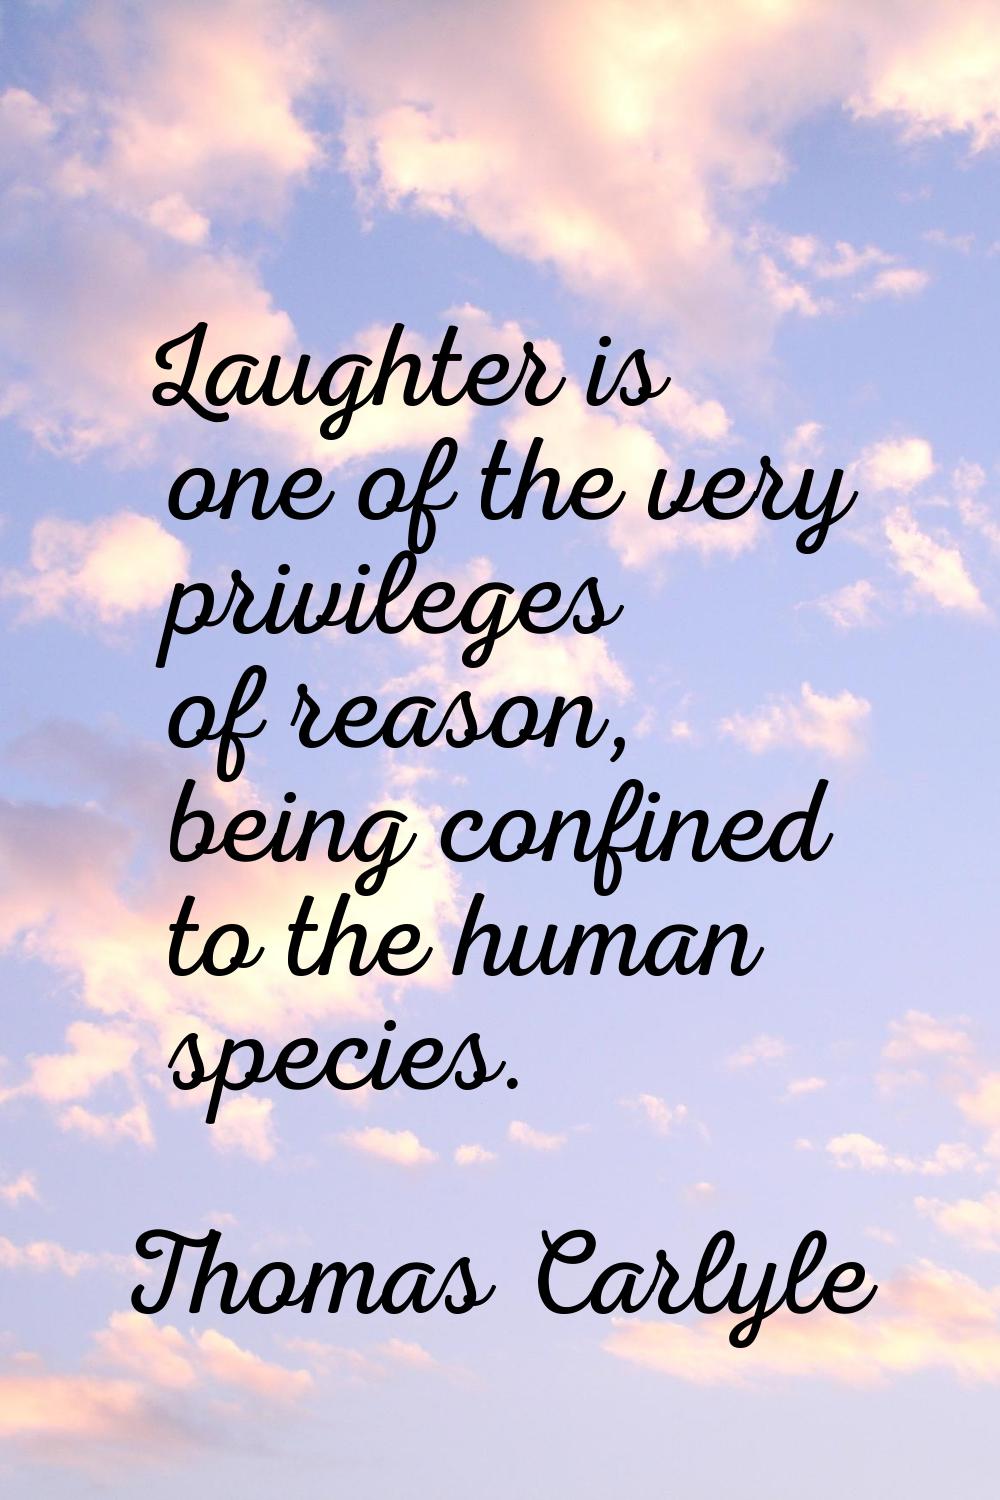 Laughter is one of the very privileges of reason, being confined to the human species.